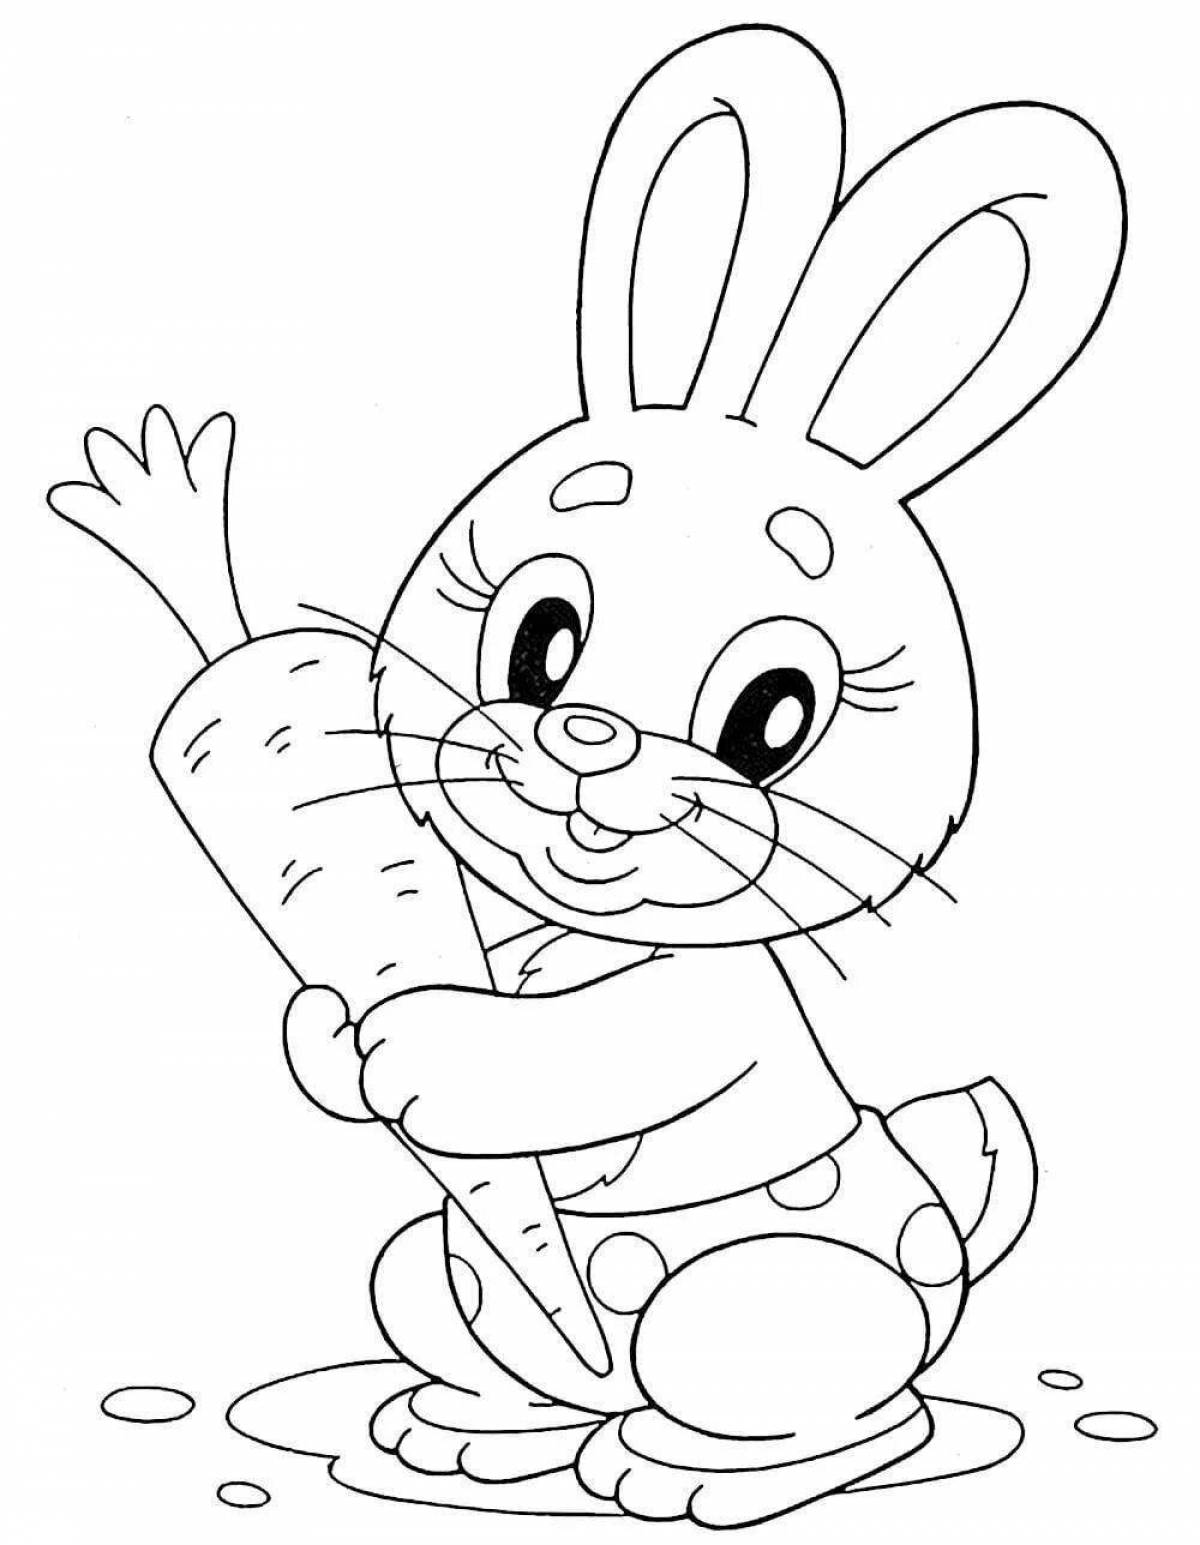 Incredible hare coloring book for kids